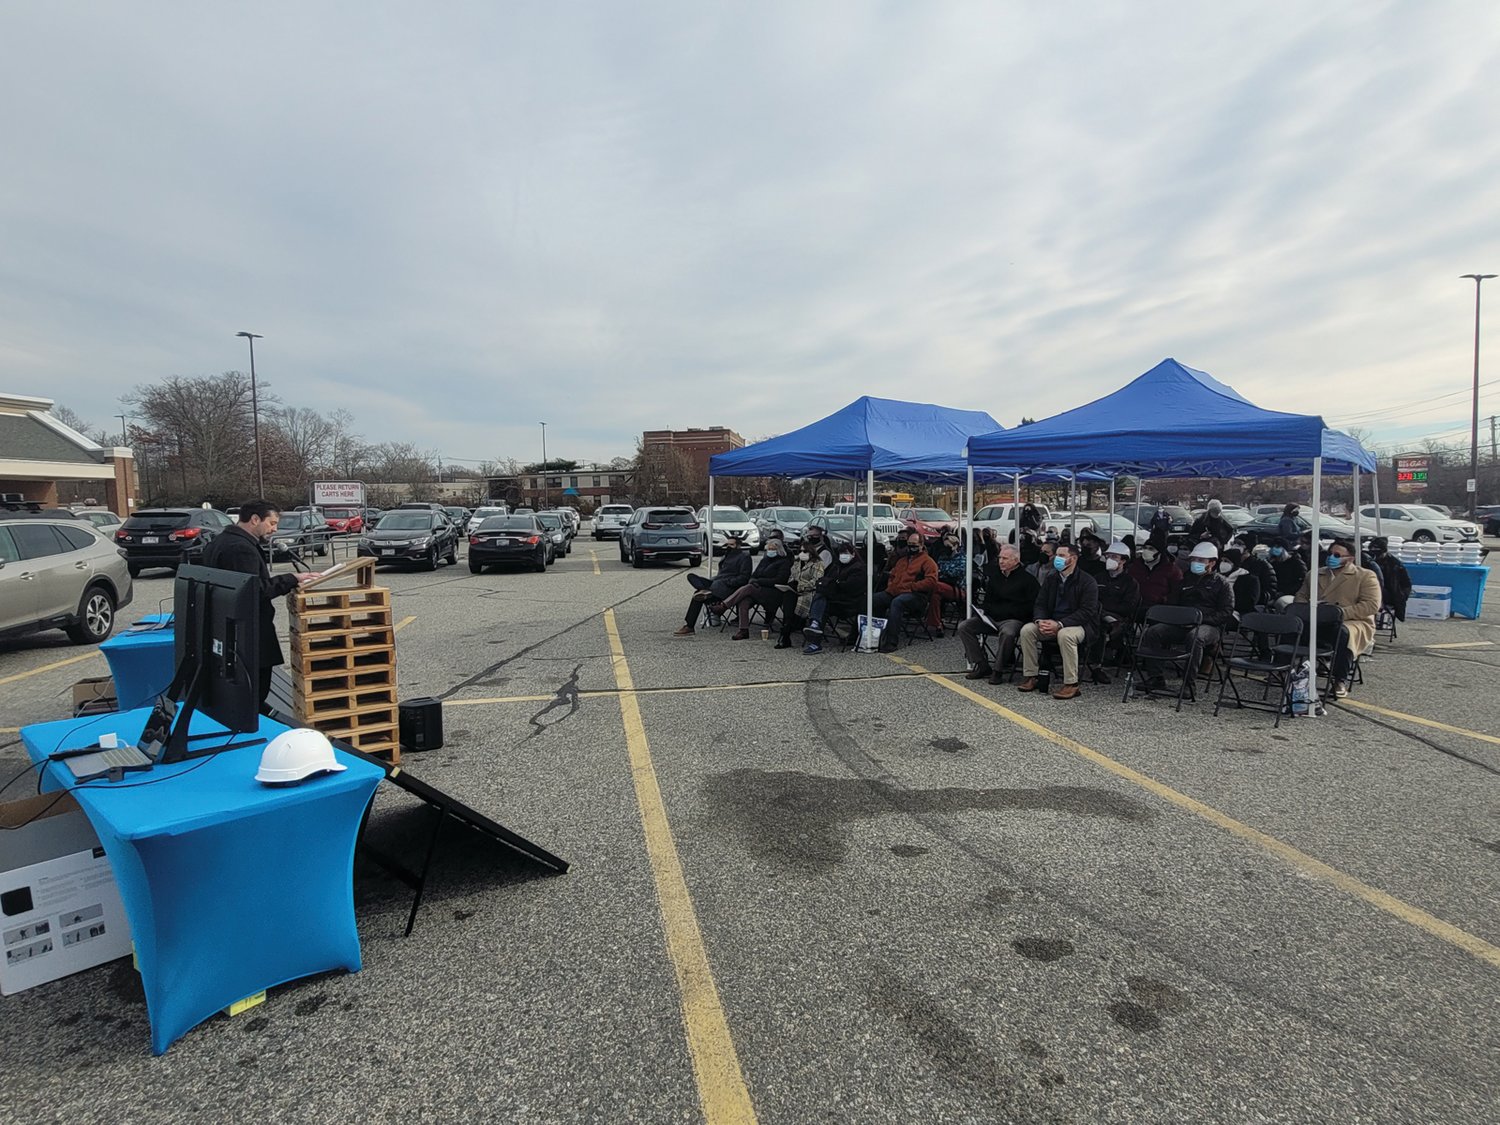 Ecogy Energy CEO Jack Bertuzzi addressed the crowd gathered in the parking lot of Johnston’s Ocean State Job Lot store on Hartford Avenue. His company will operate the newly installed solar field on the store’s roof.